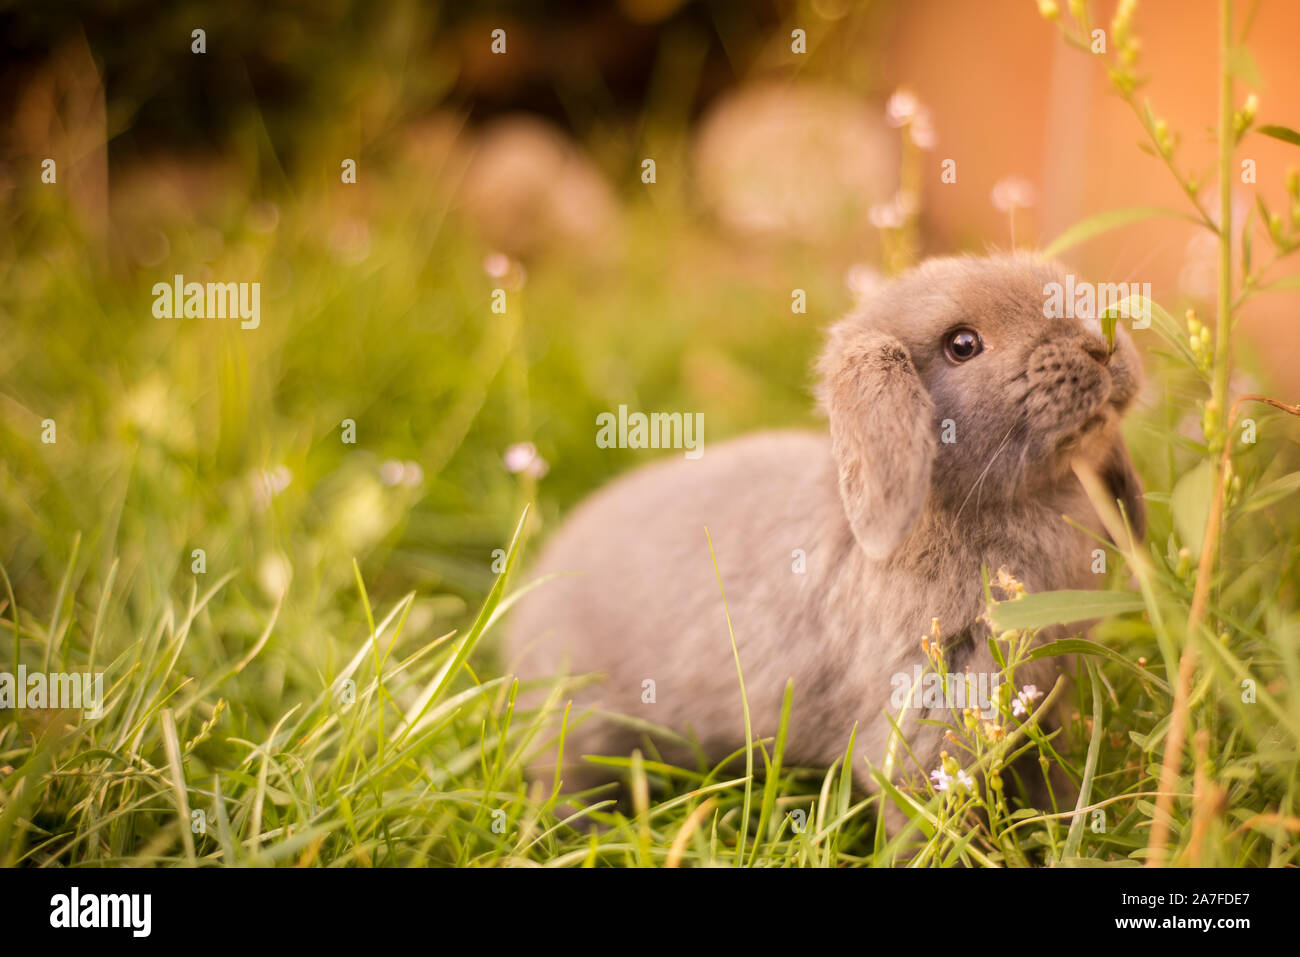 Cute gray haired Japanese dwarf rabbit, with hanging ears in a garden sniffing at grass stalks Stock Photo